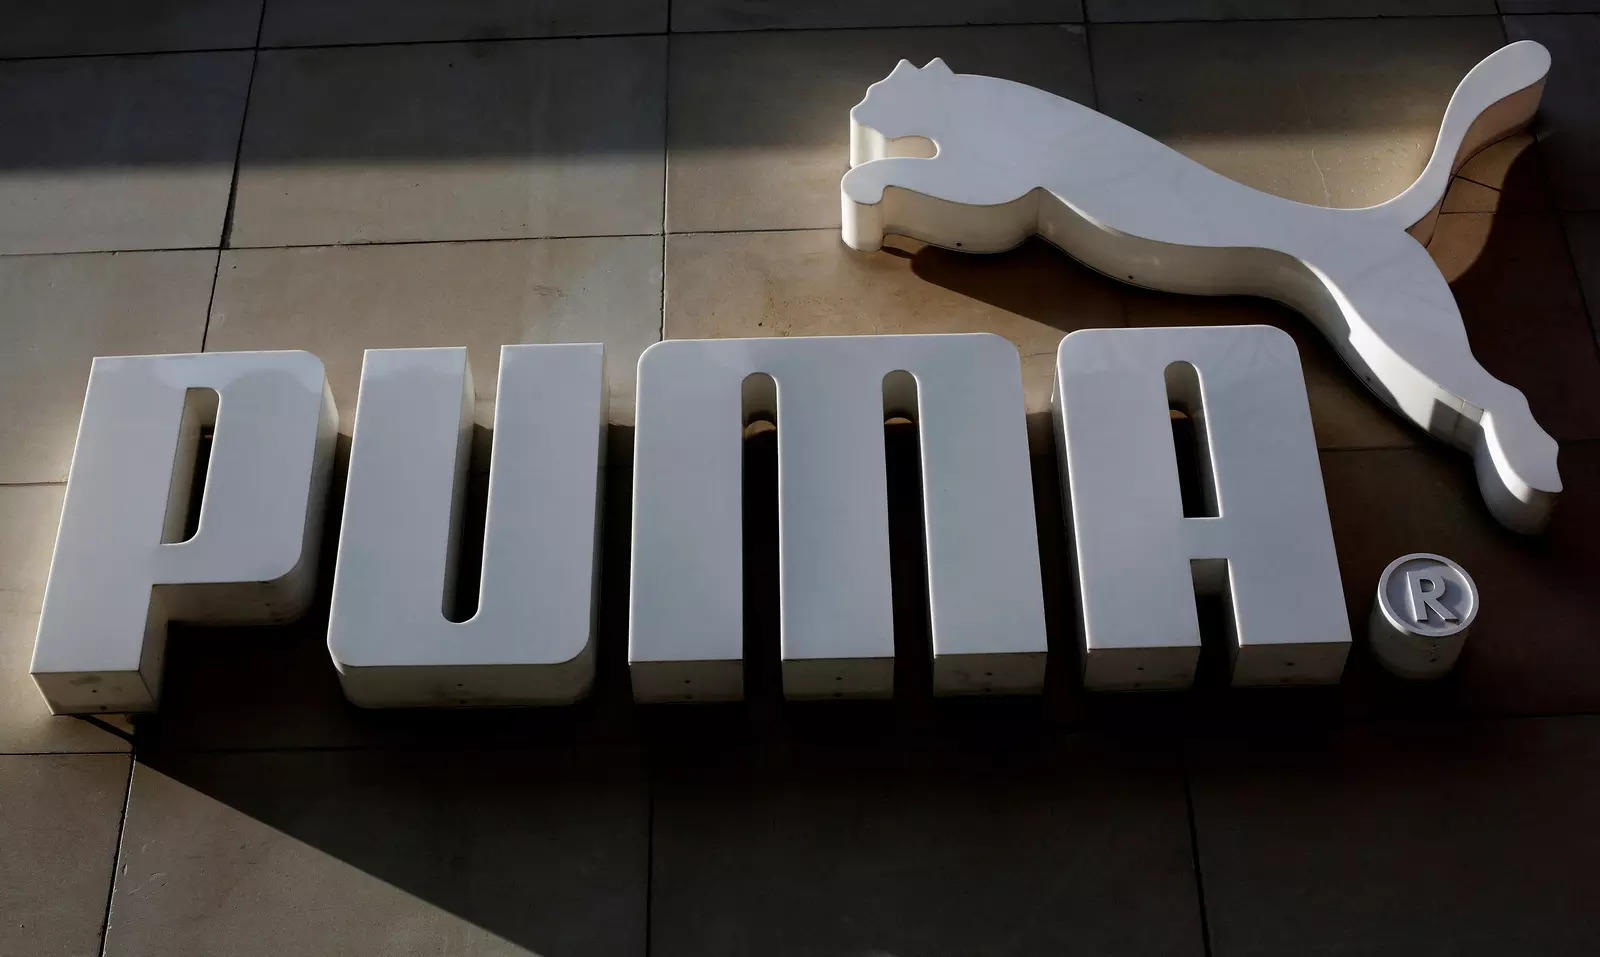 Puma confirms operating profit, sales outlook after Q3 results